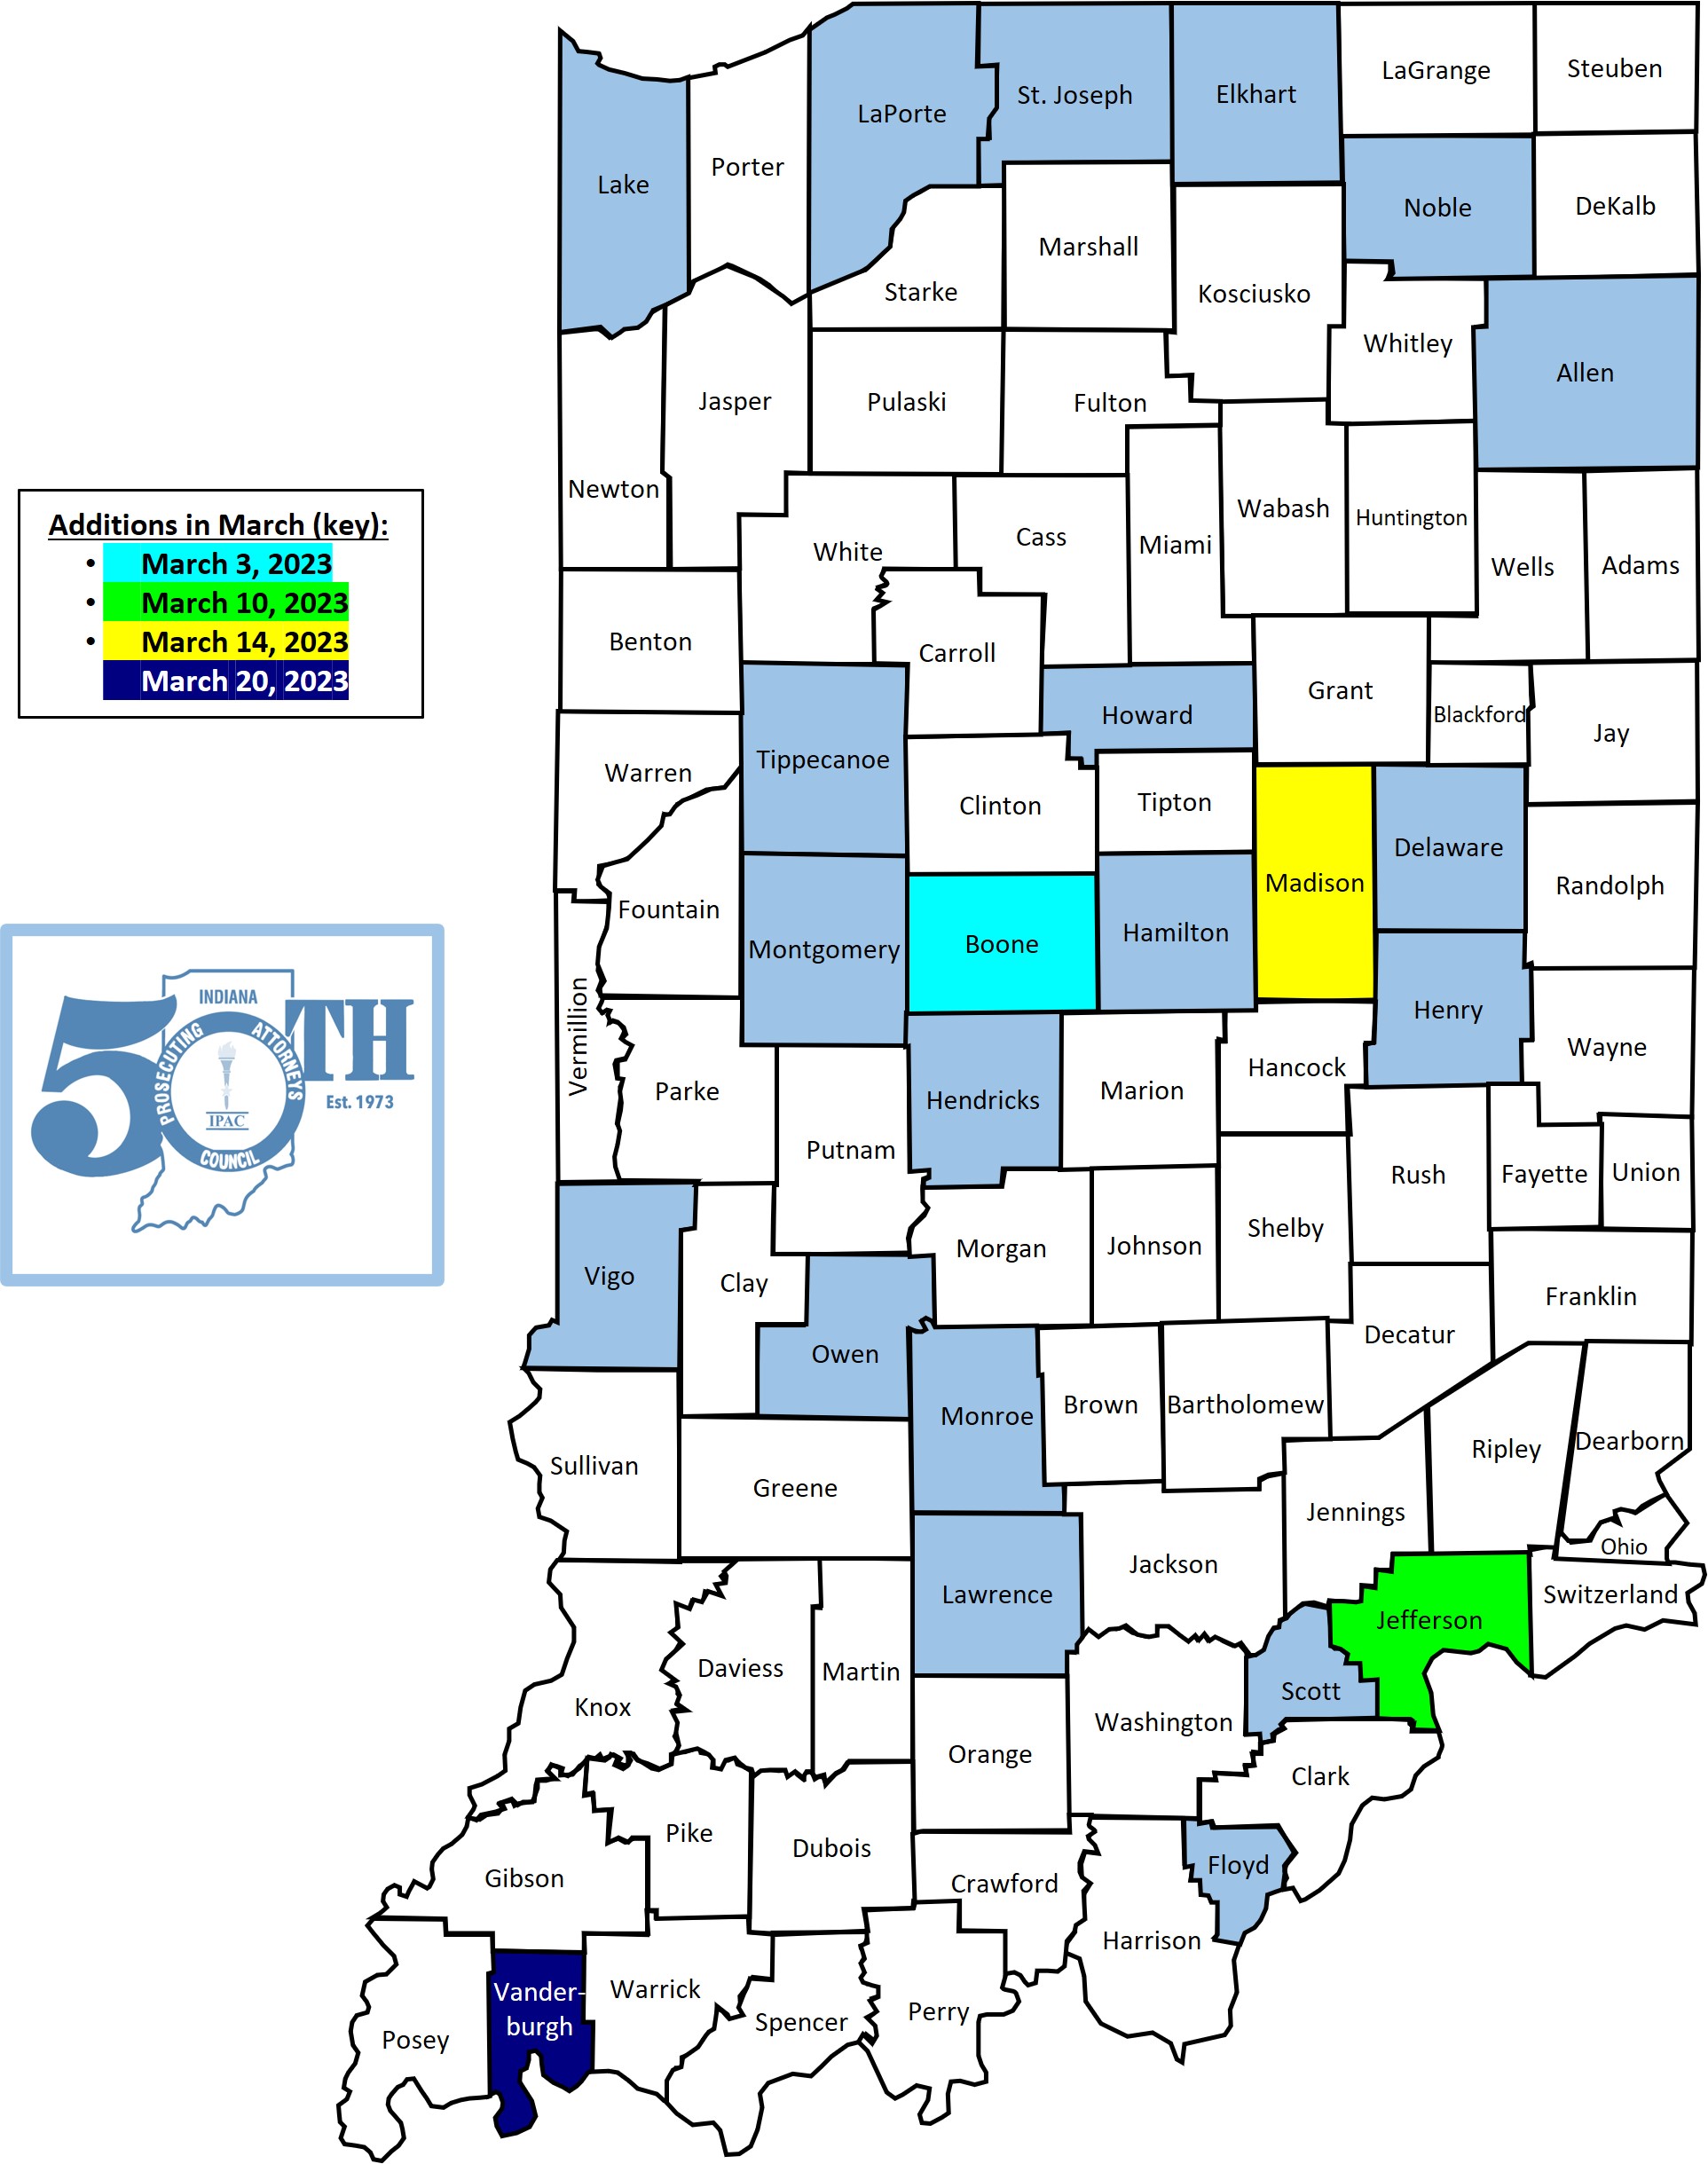 Map of Indiana showing counties with employment opportunities highlighted